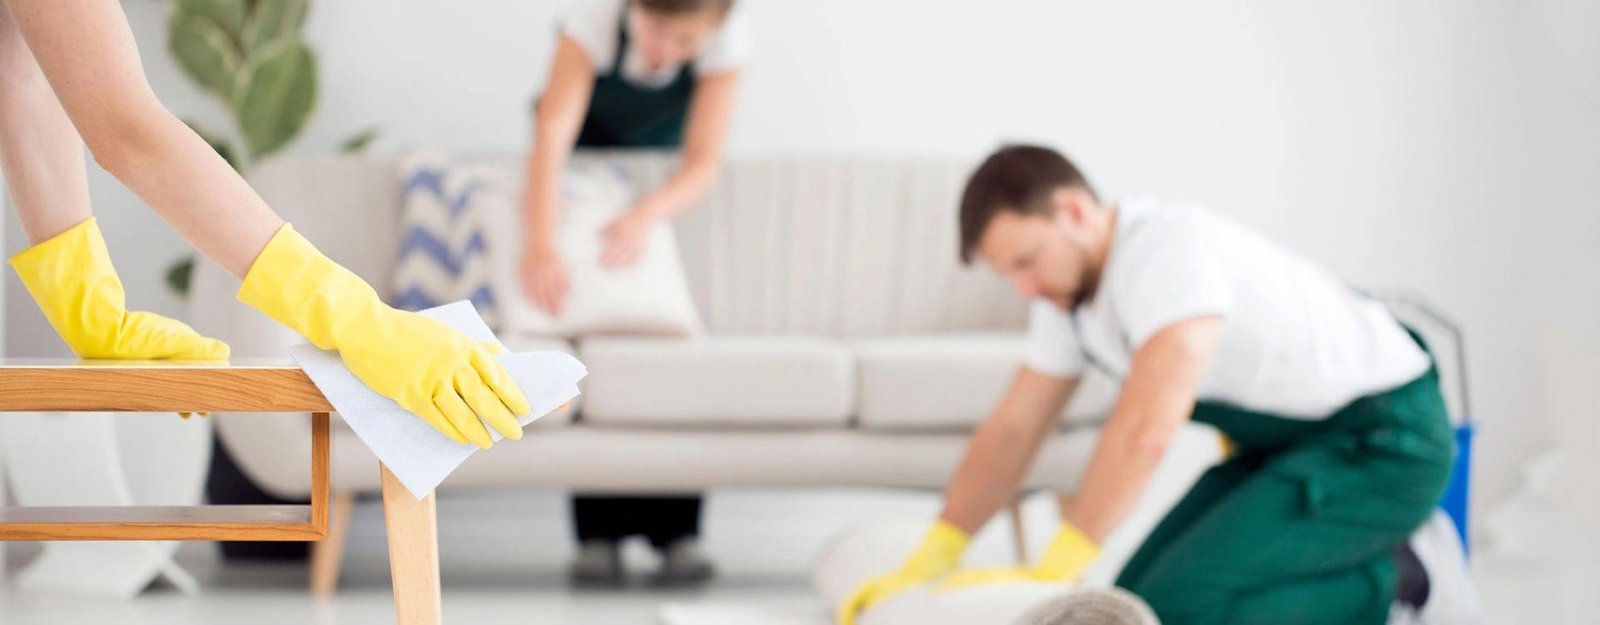 Best Local Cleaners in Washington Dc